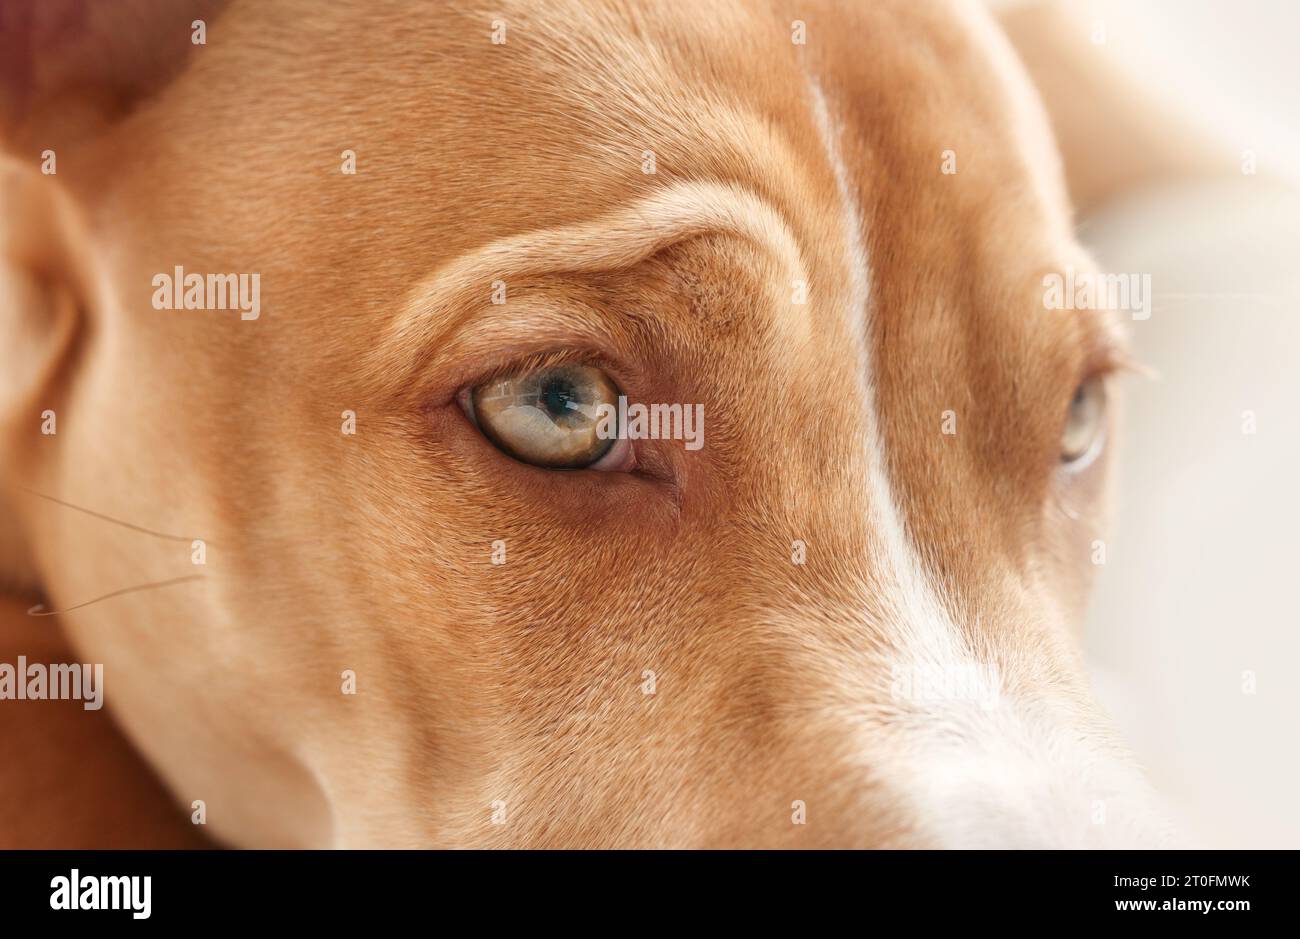 Dog close up with focus on eye. Cute puppy dog face frowning with wrinkles. Eyesight or eye vision for dogs concept. 6 month old, female Boxer Pitbull Stock Photo